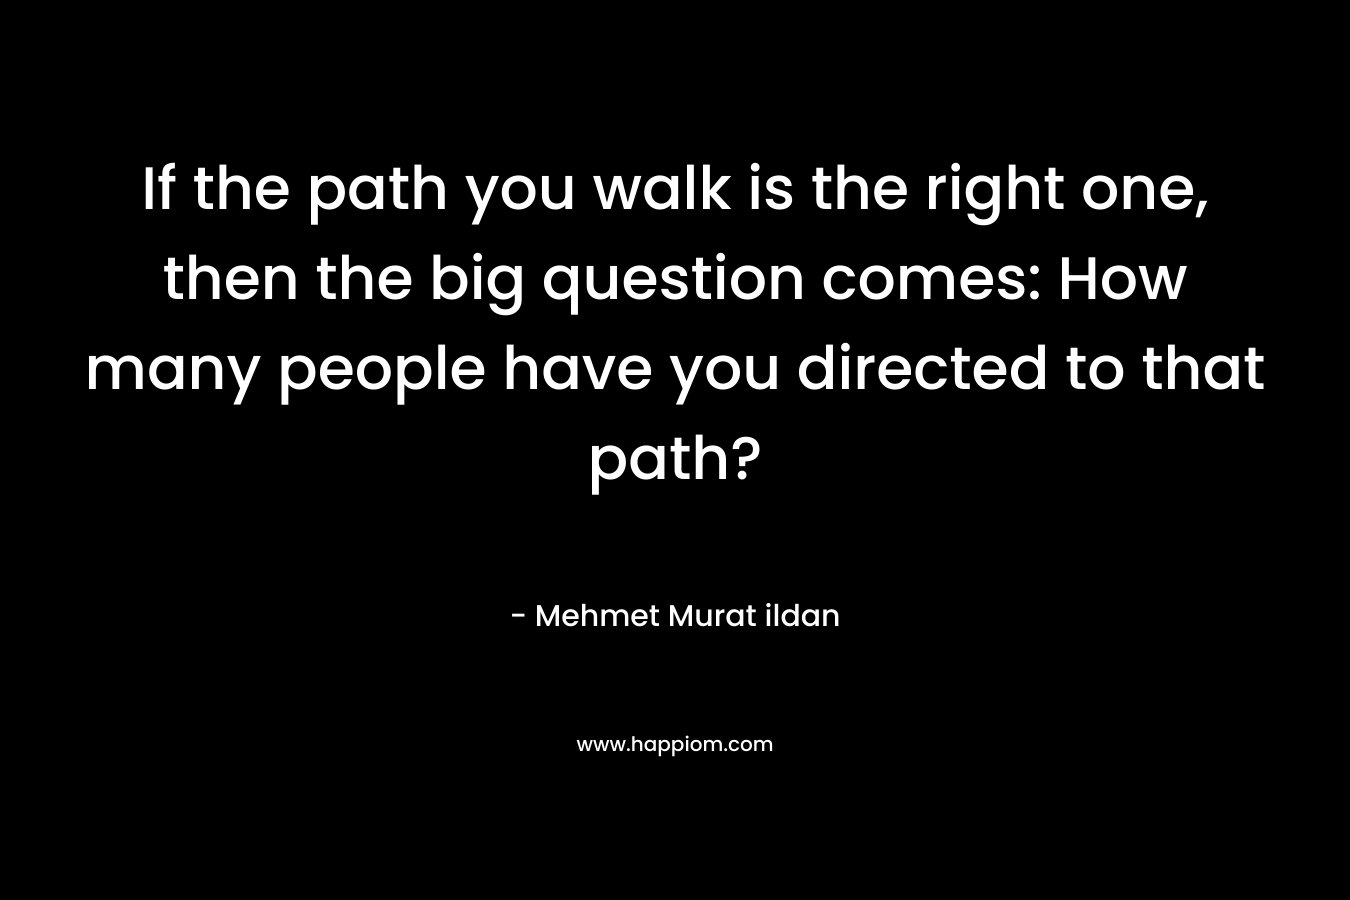 If the path you walk is the right one, then the big question comes: How many people have you directed to that path?